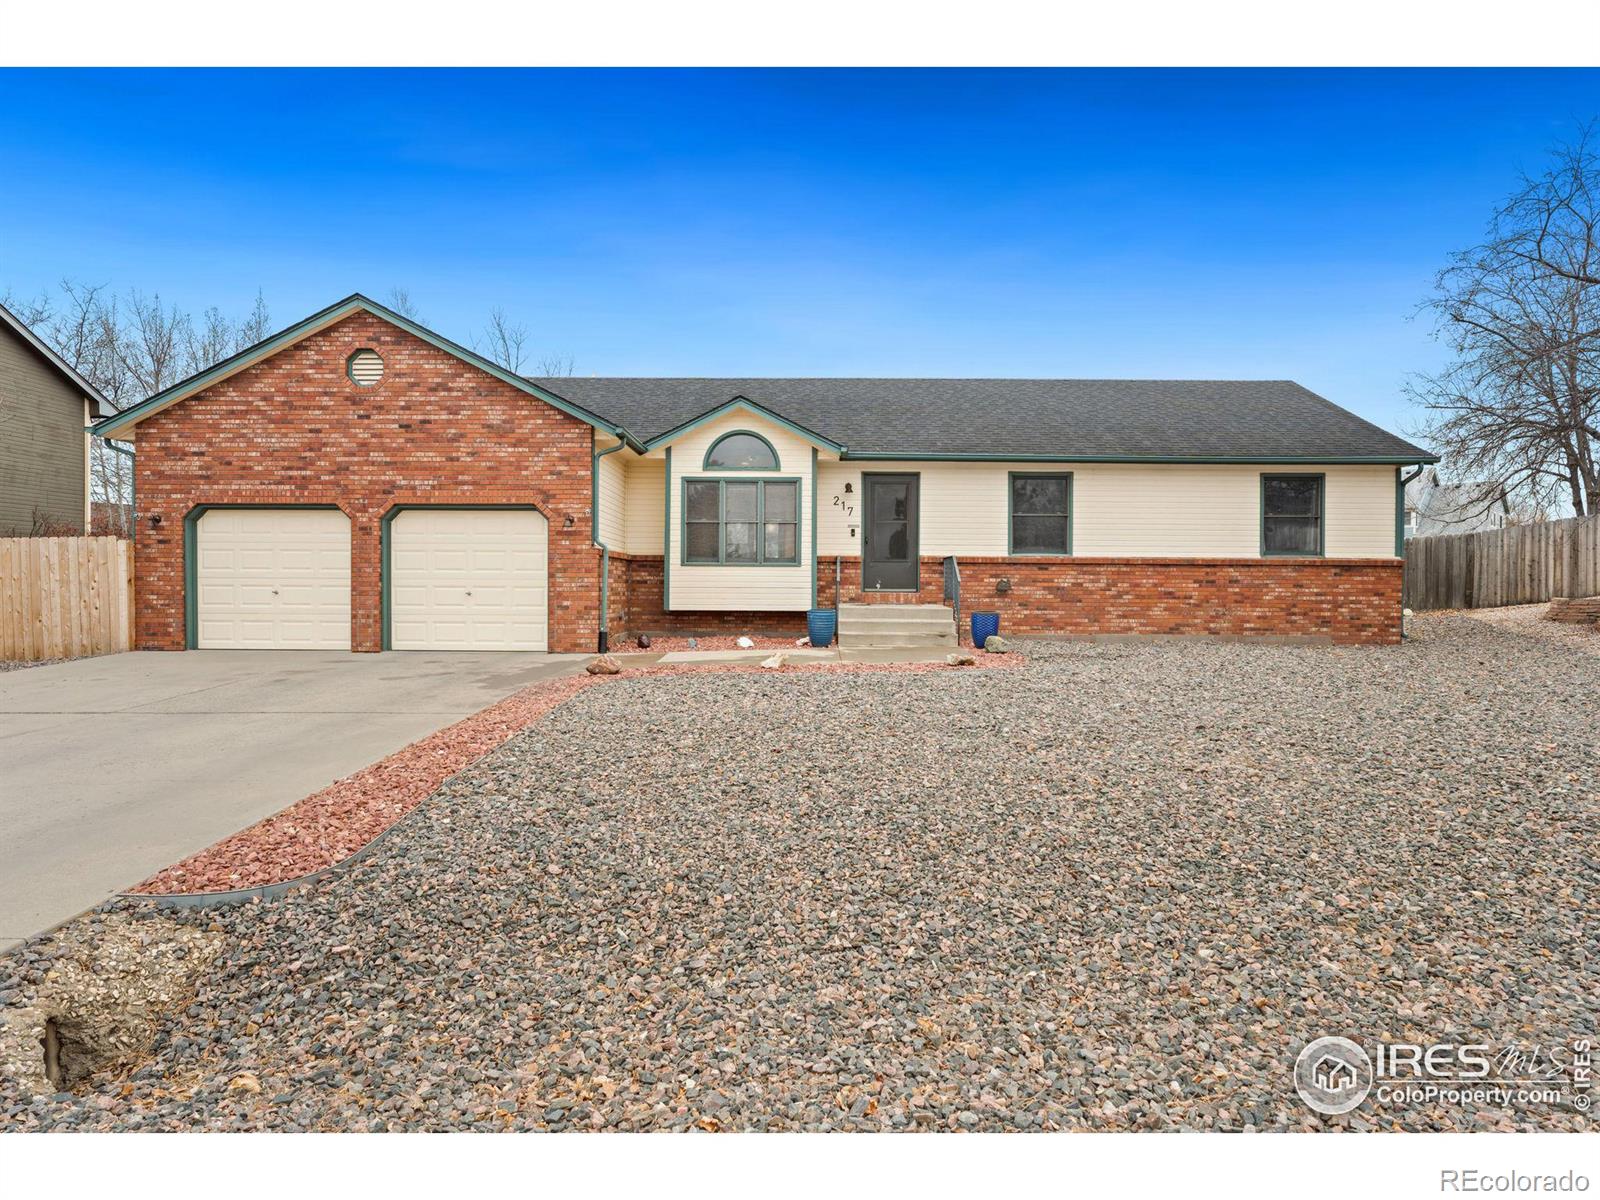 Report Image for 217  Jewel Court,Fort Collins, Colorado